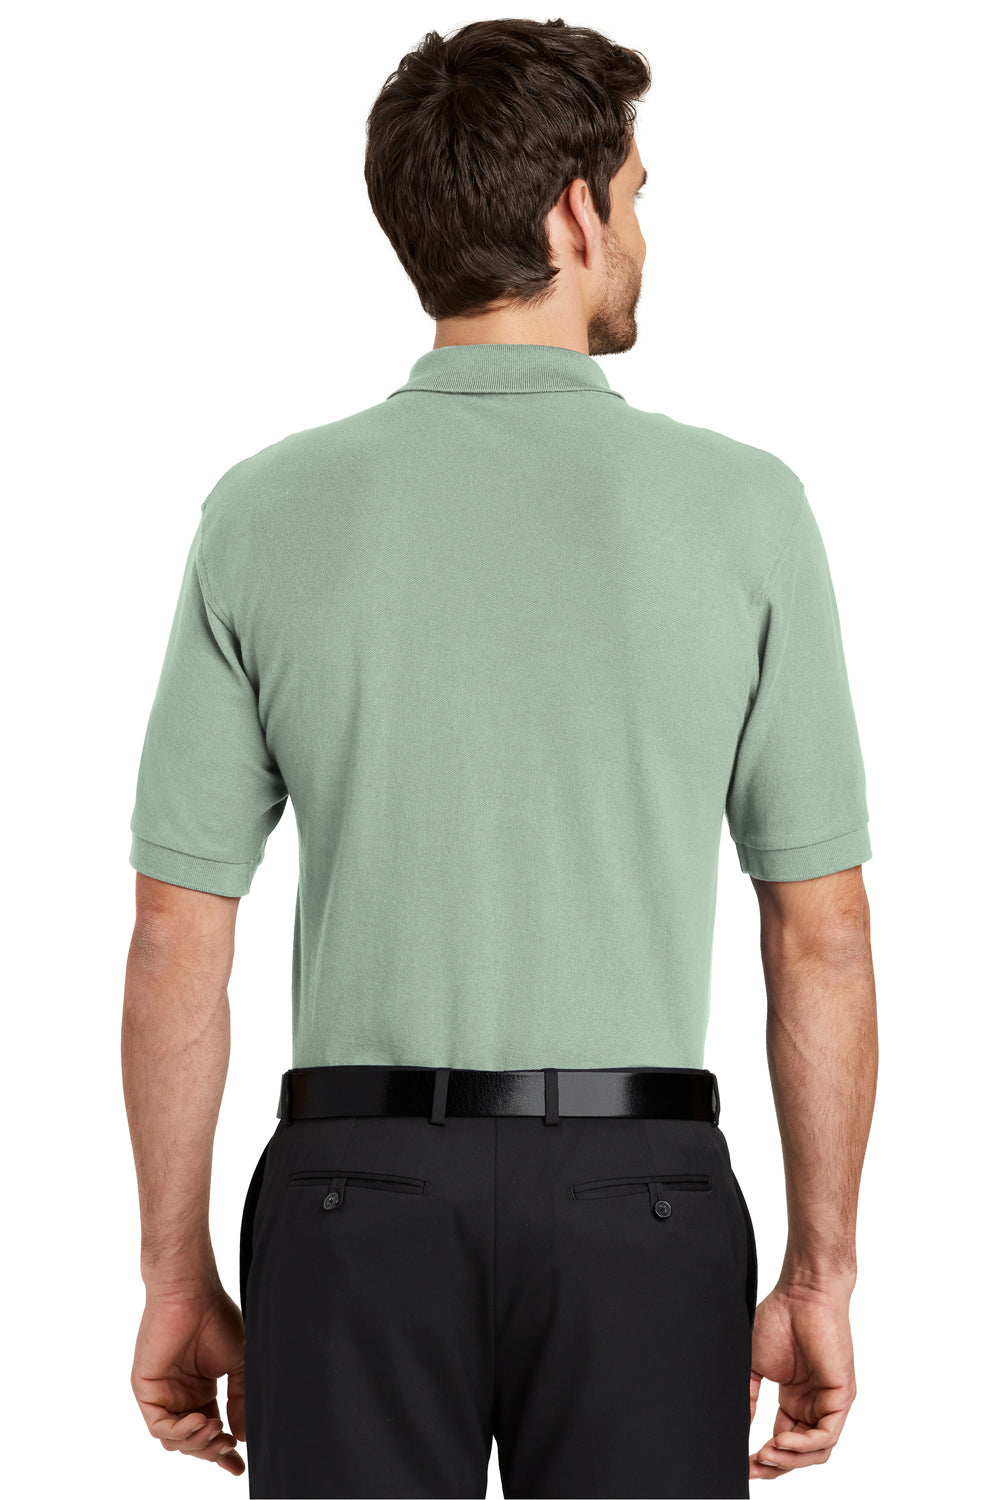 Port Authority K500 Mens Silk Touch Wrinkle Resistant Short Sleeve Polo Shirt Mint Green Back